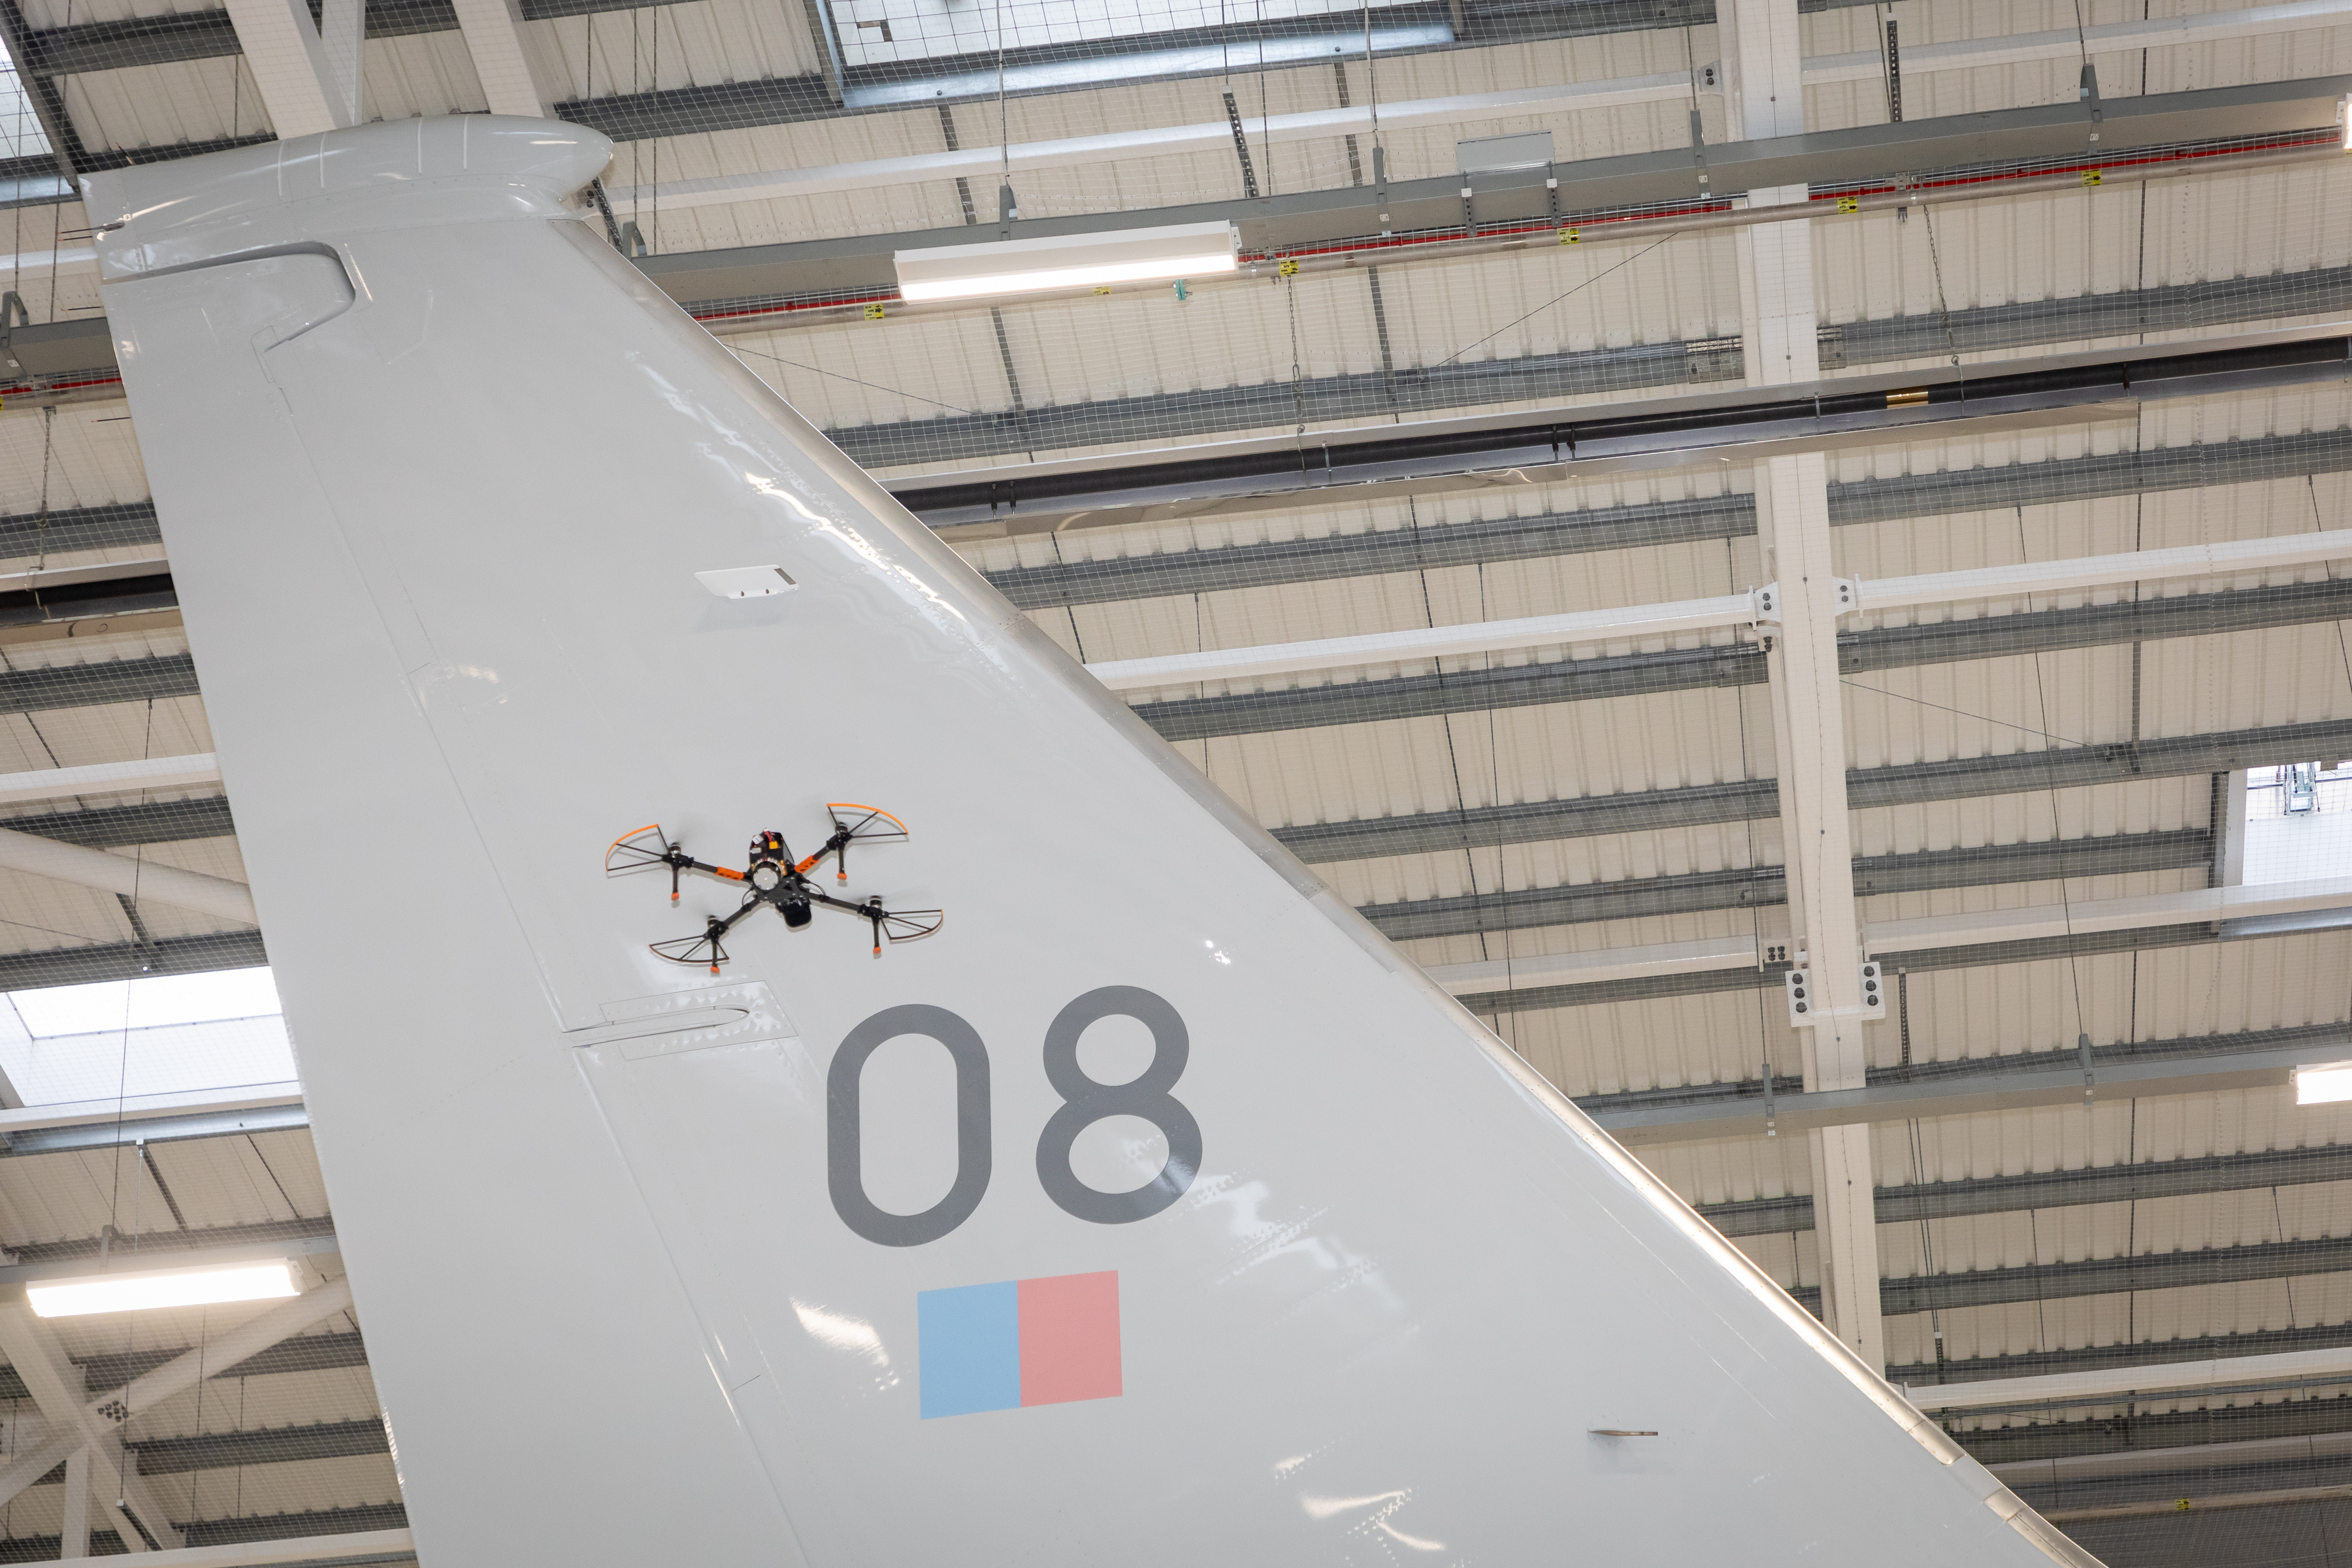 A drone flies in front of a tail fin of an aircraft in a hangar